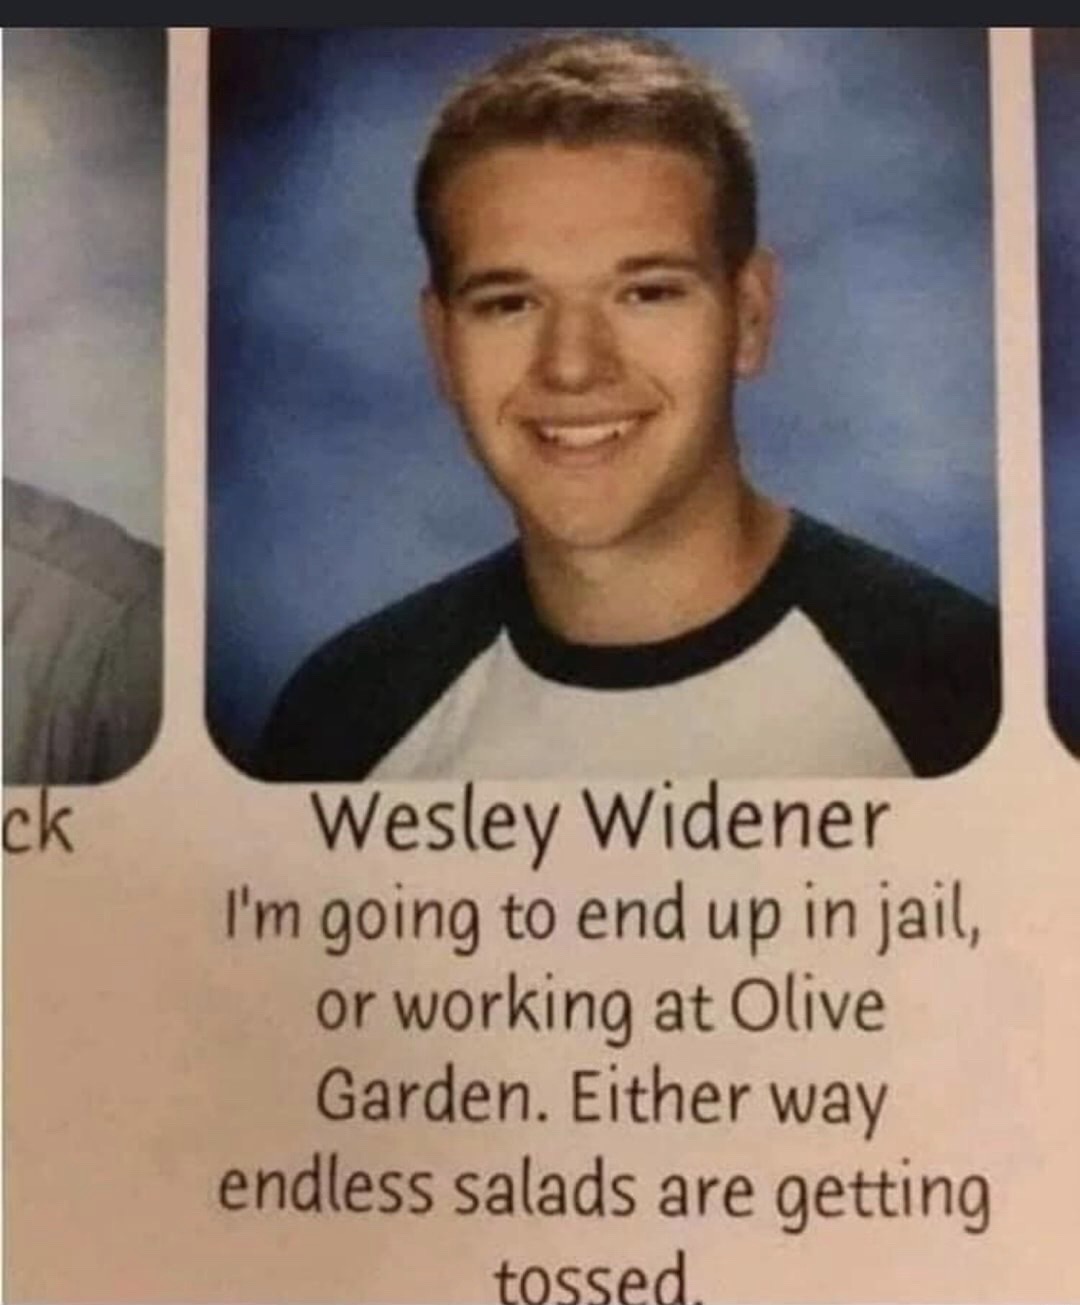 wesley widener - ck Wesley Widener I'm going to end up in jail, or working at Olive Garden. Either way endless salads are getting tossed.